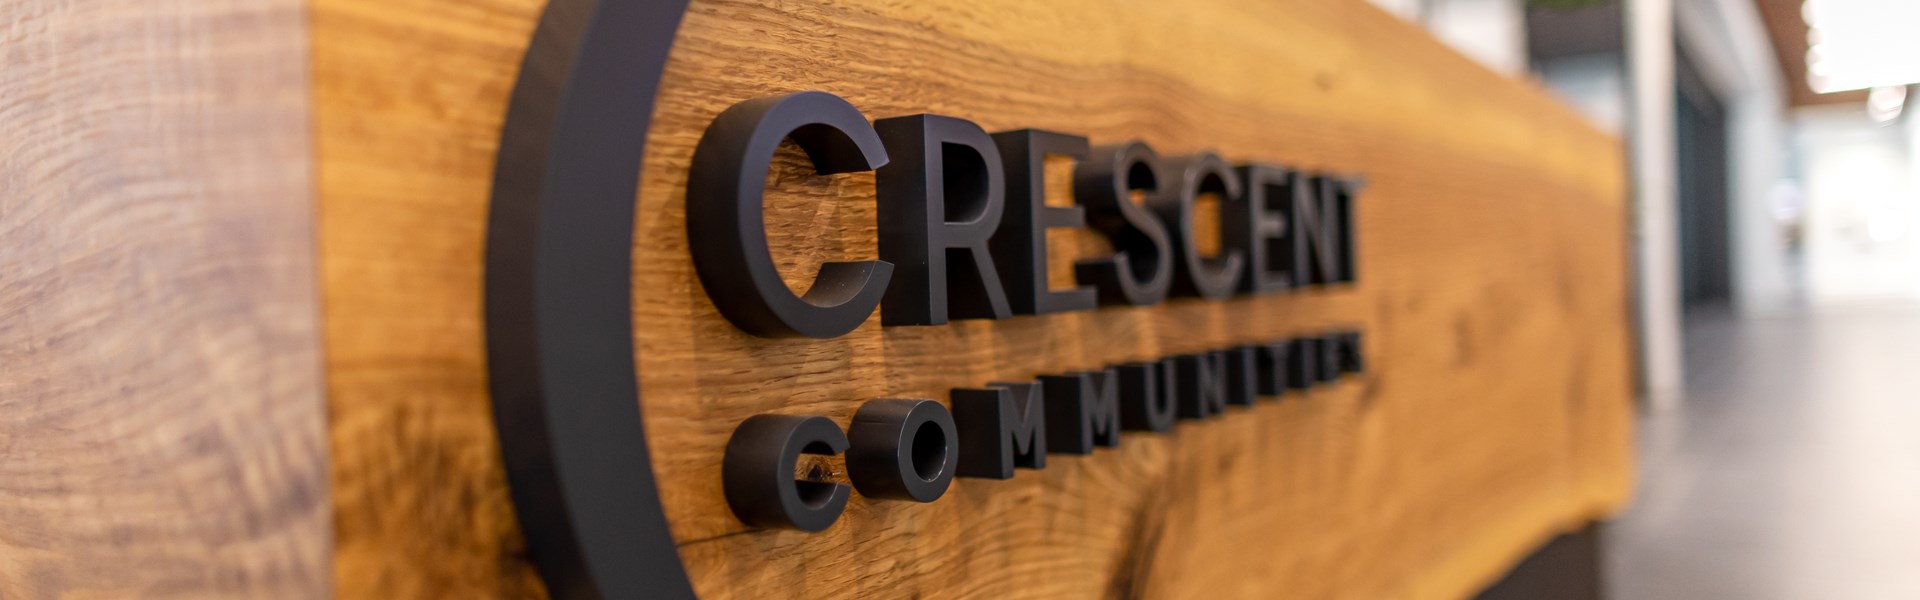 Crescent Communities and Project Destined Announce Expanded Strategic Partnership to Provide Mentorship and Opportunity to Students in Charlotte